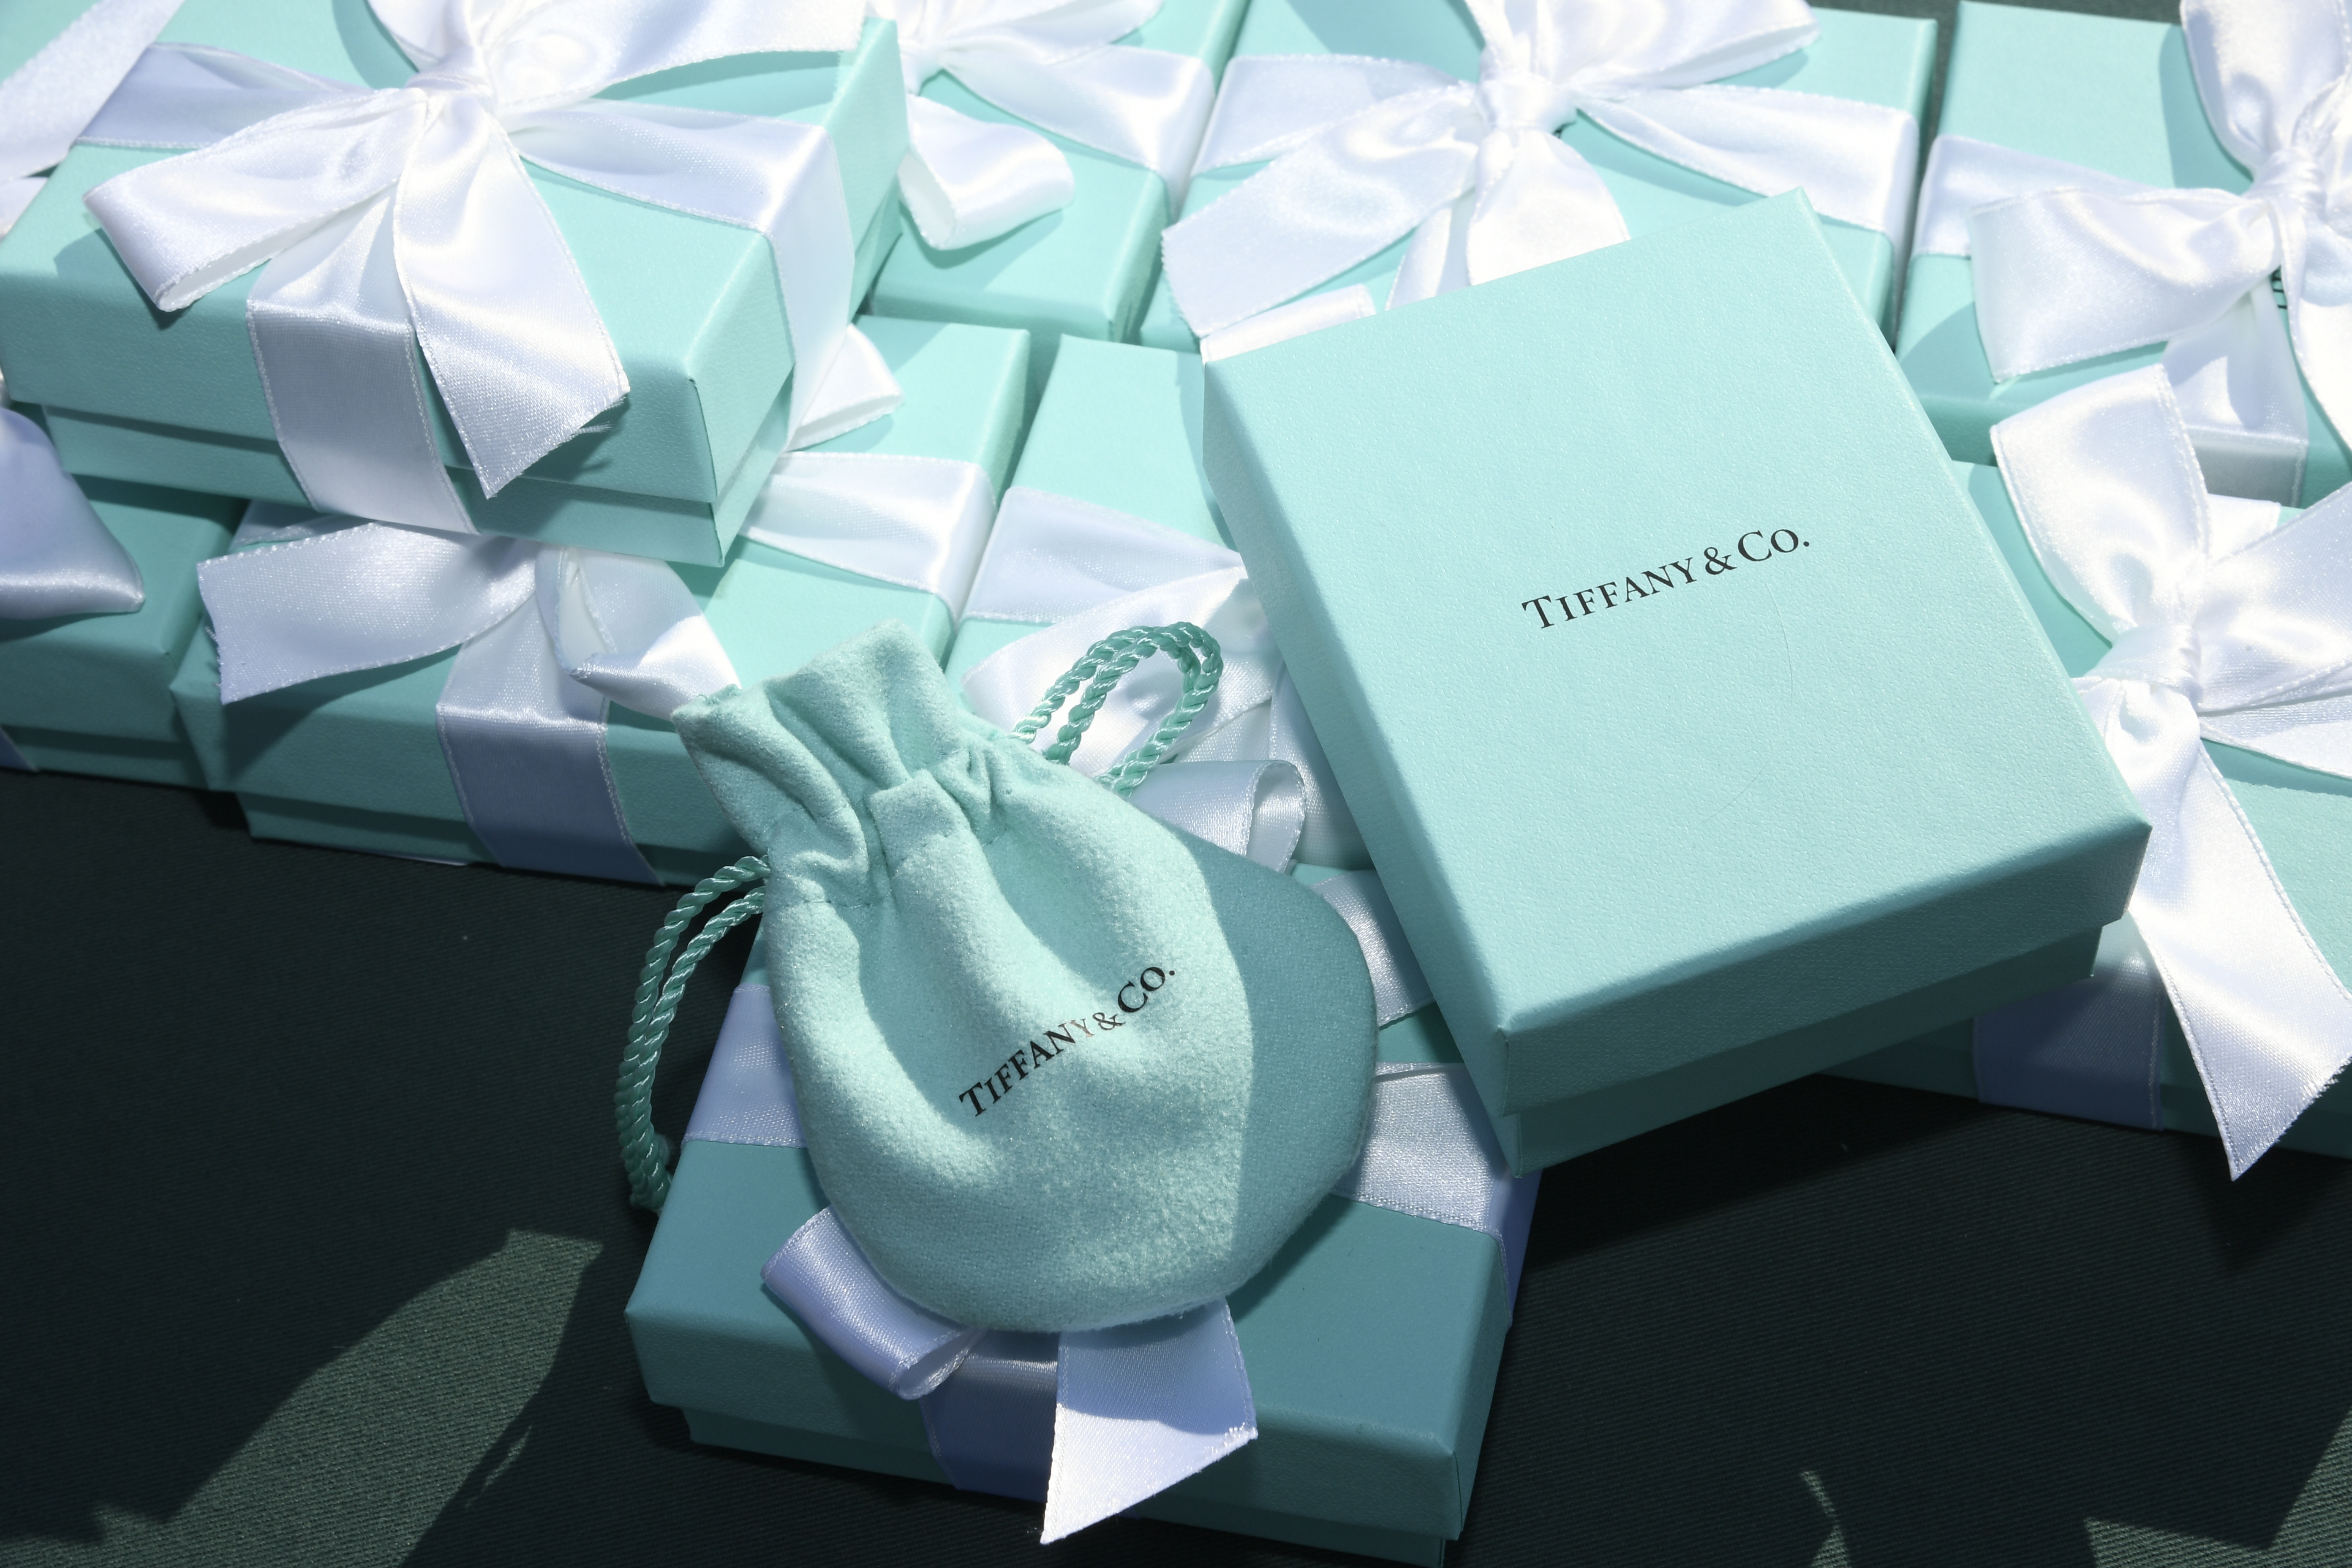 Costco Has to Pay $19 Million After Selling 2,500 Fake Tiffany & Co. Rings